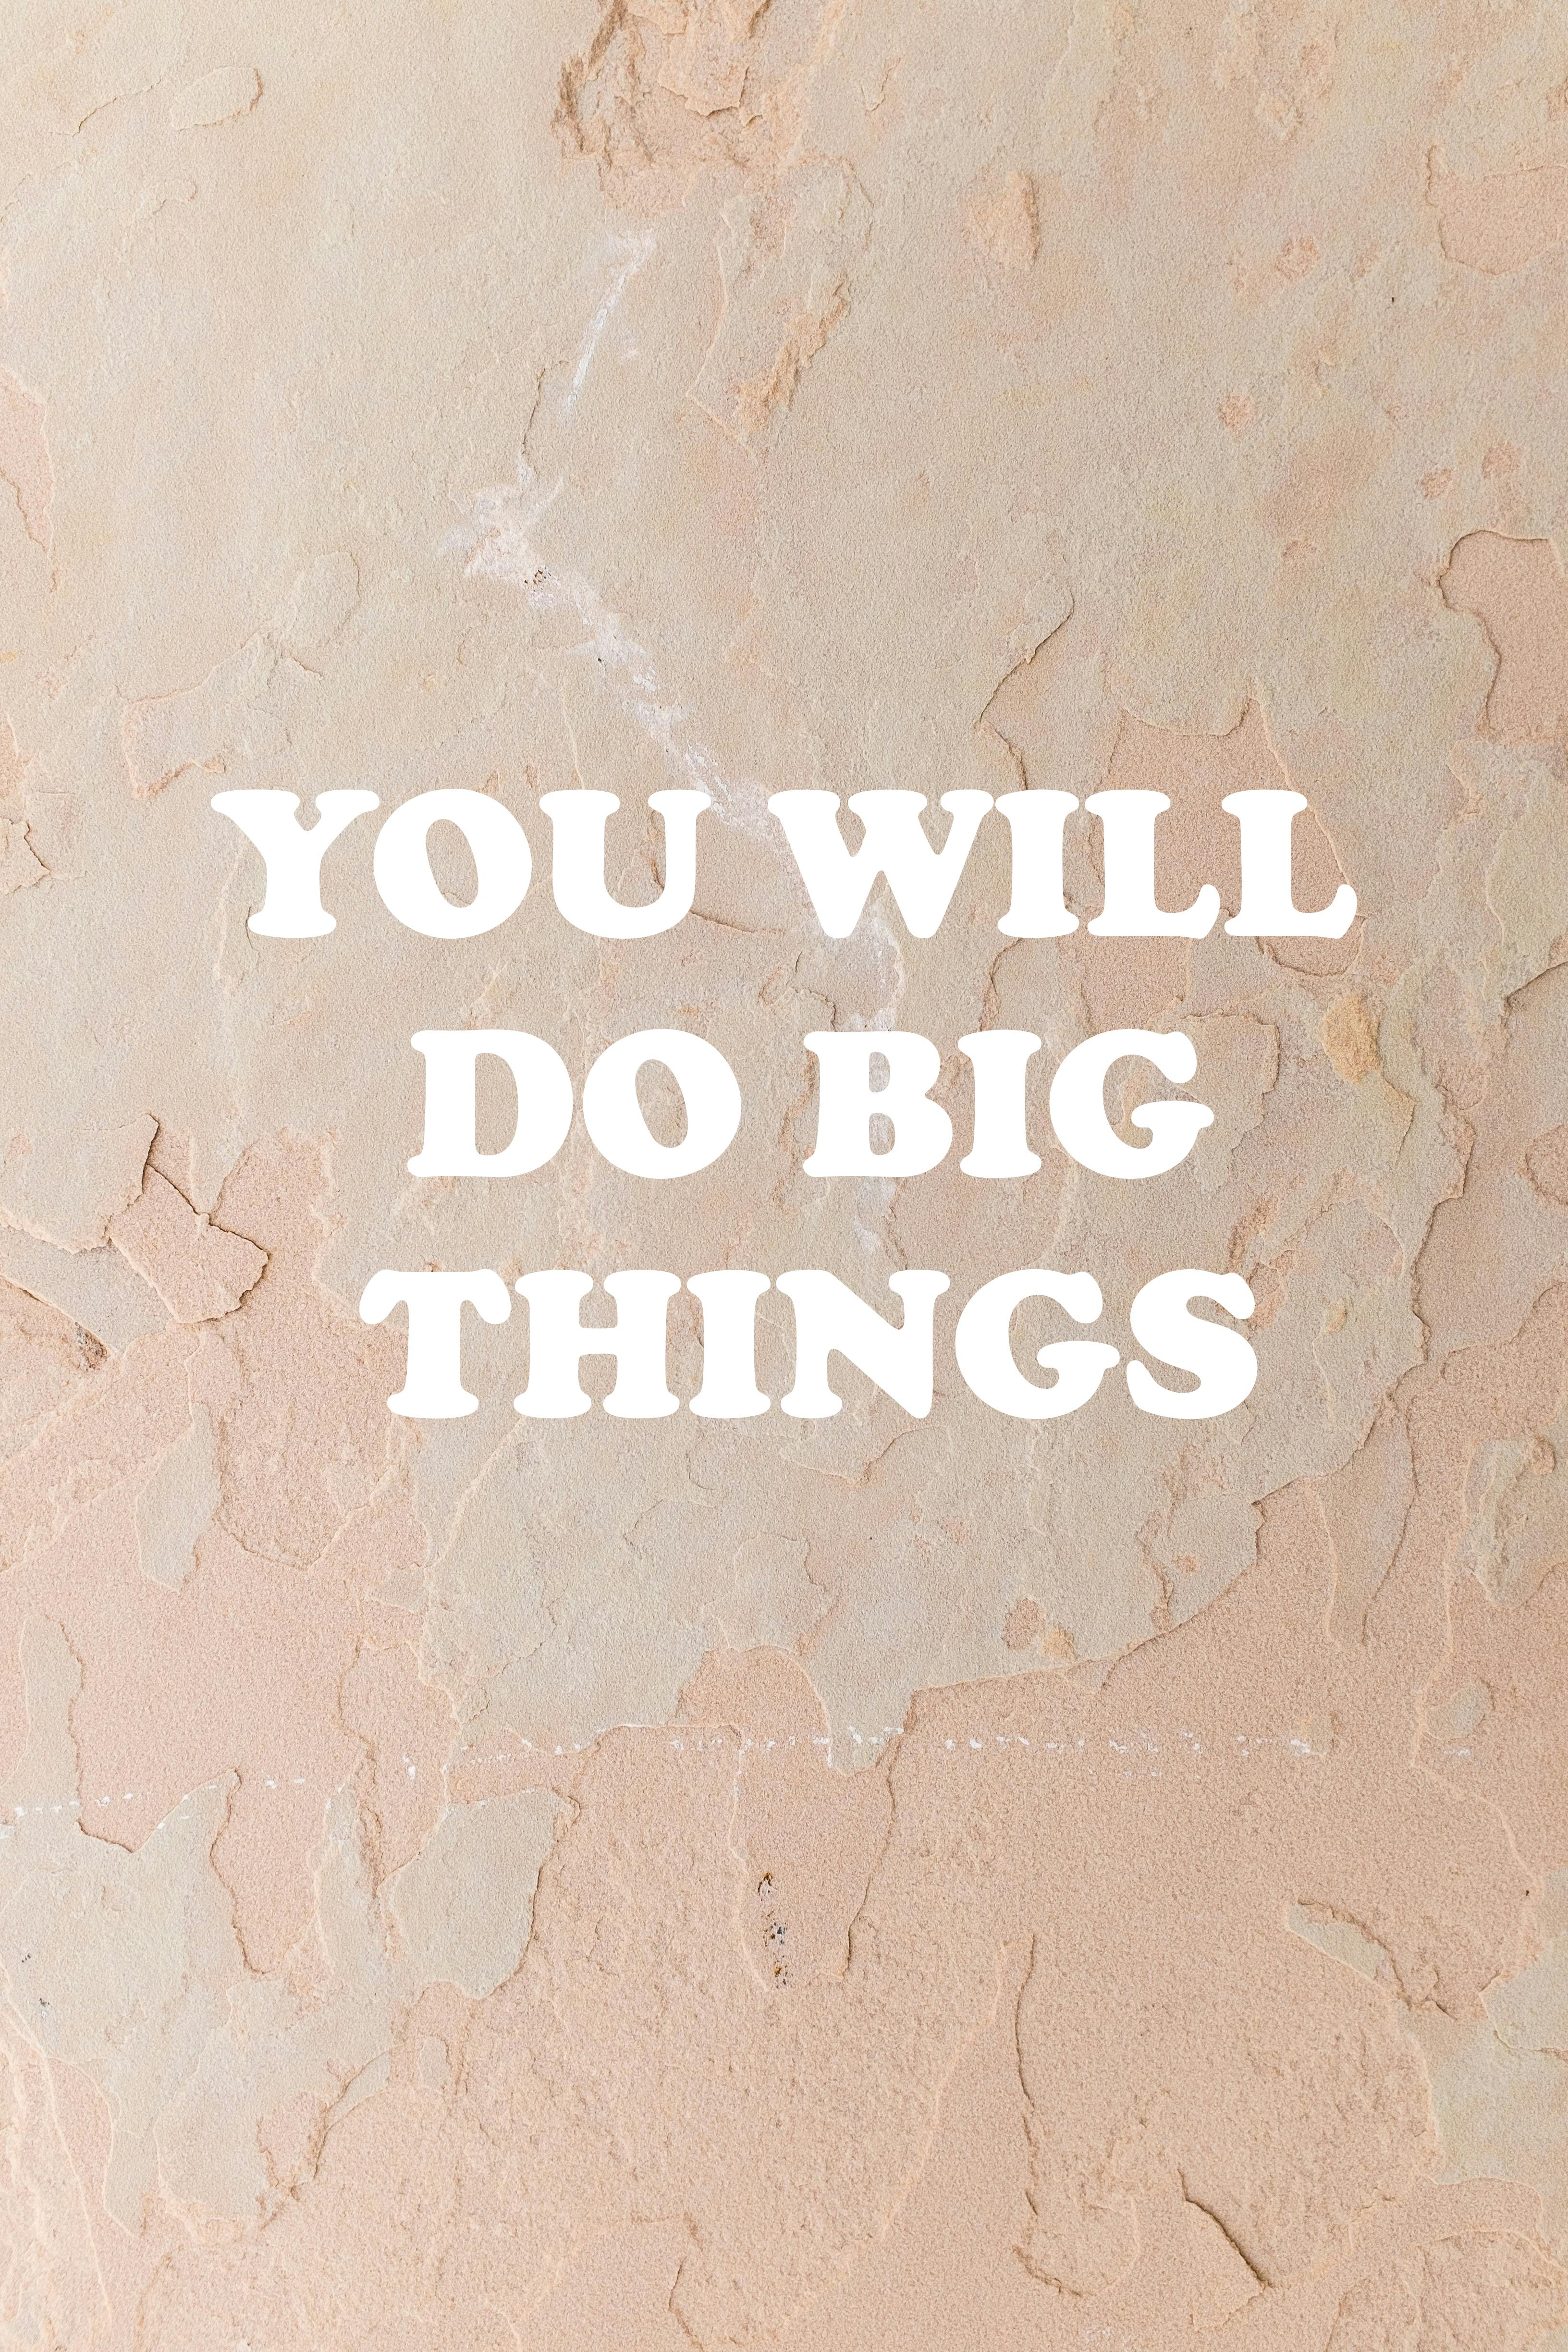 New Inspirational Wallpapers For Your Phone - Mash Elle